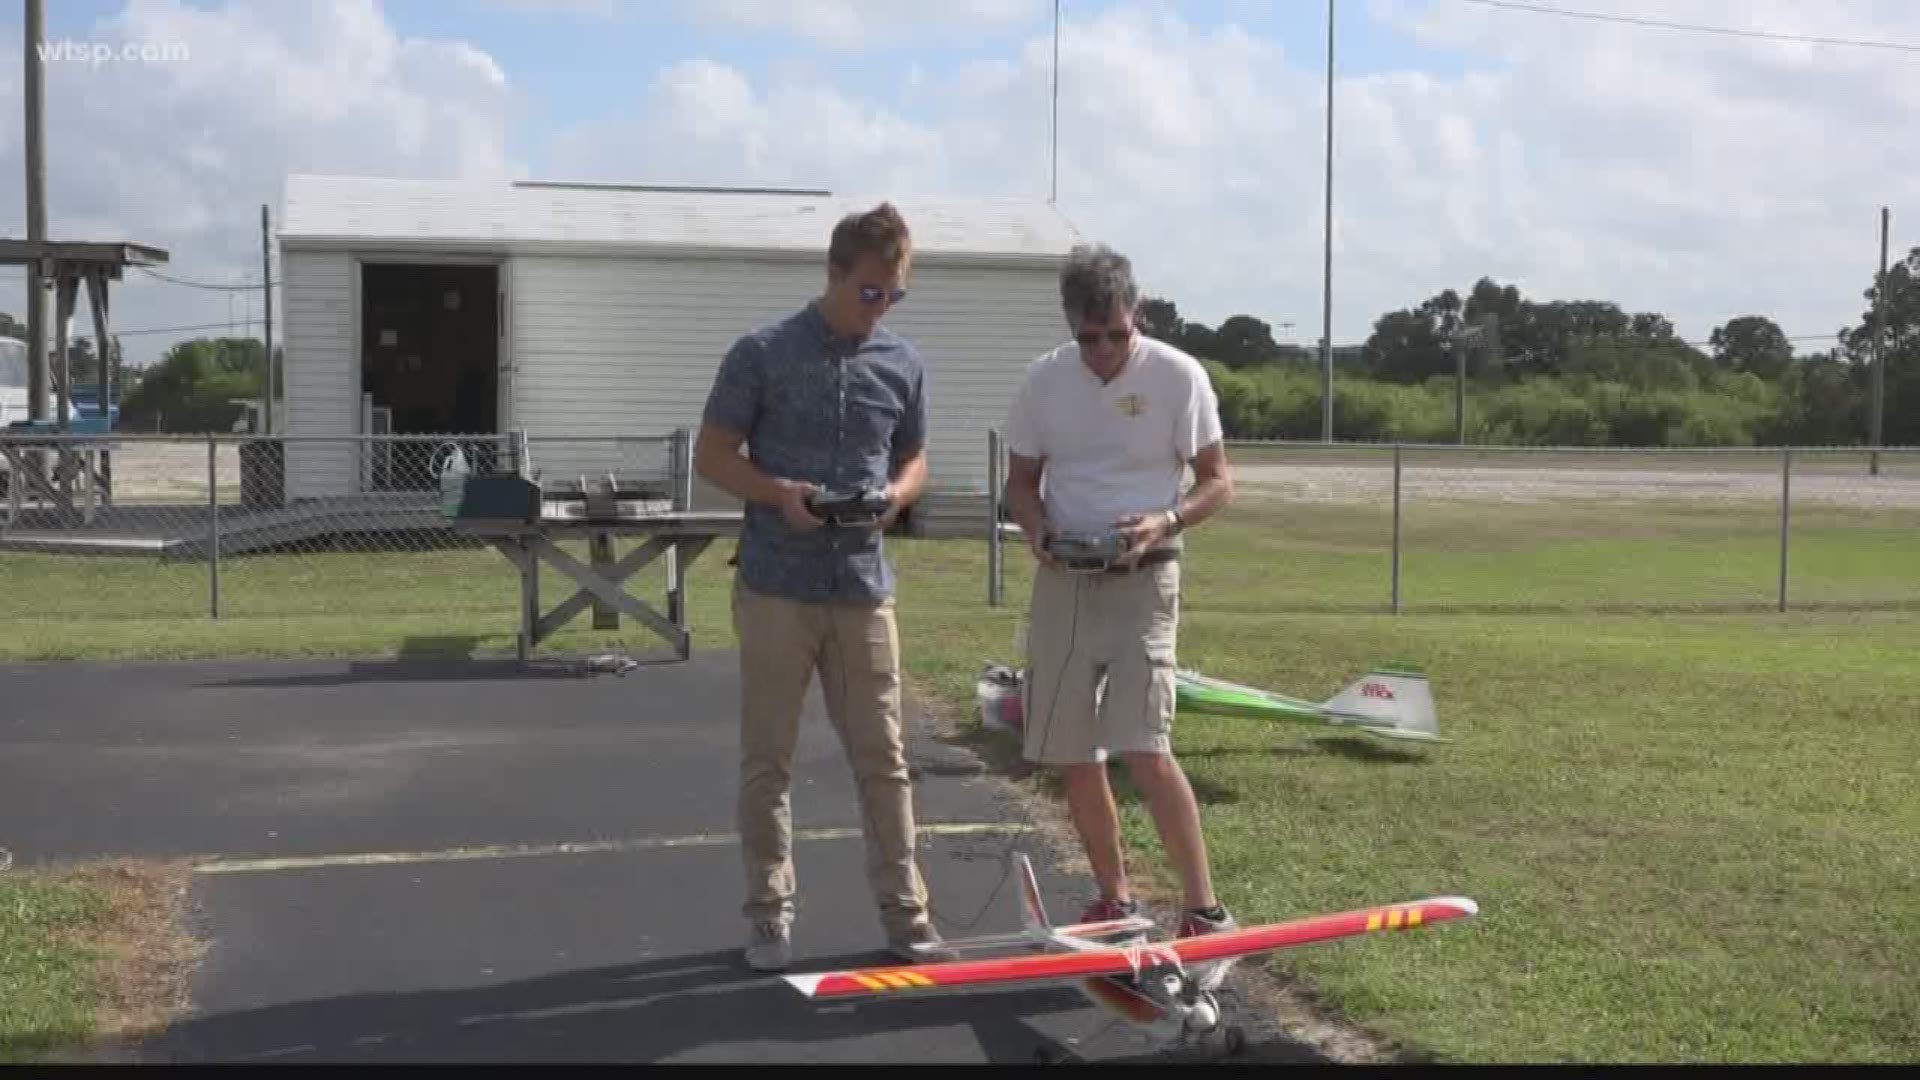 The RC Sparks Model Aviation Club is located at 10550 16th St N, St. Petersburg, FL 33702